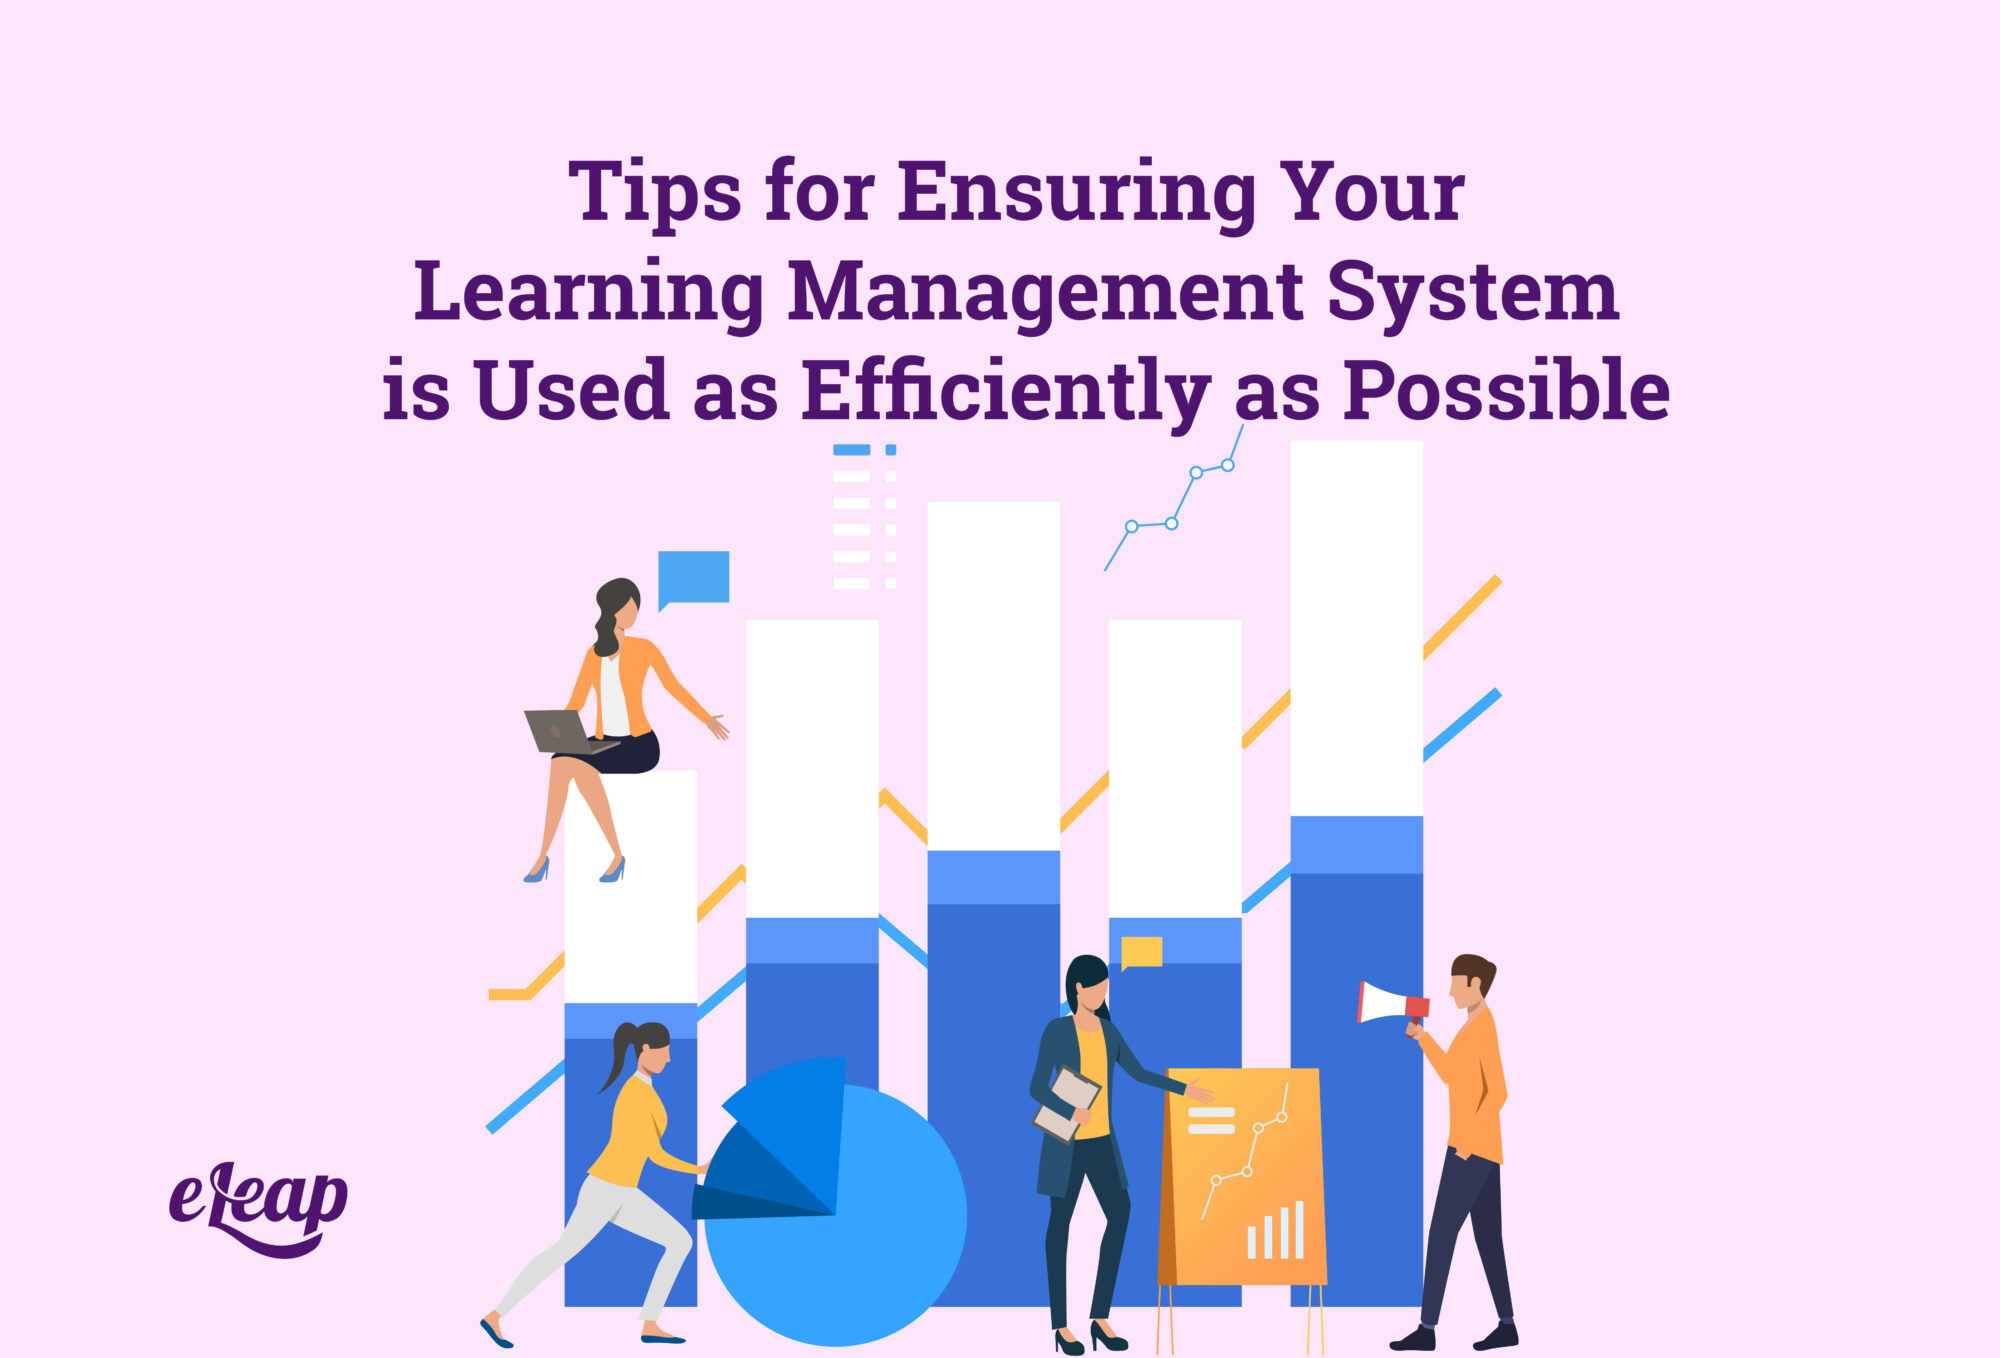 Tips for Ensuring Your Learning Management System is Used as Efficiently as Possible